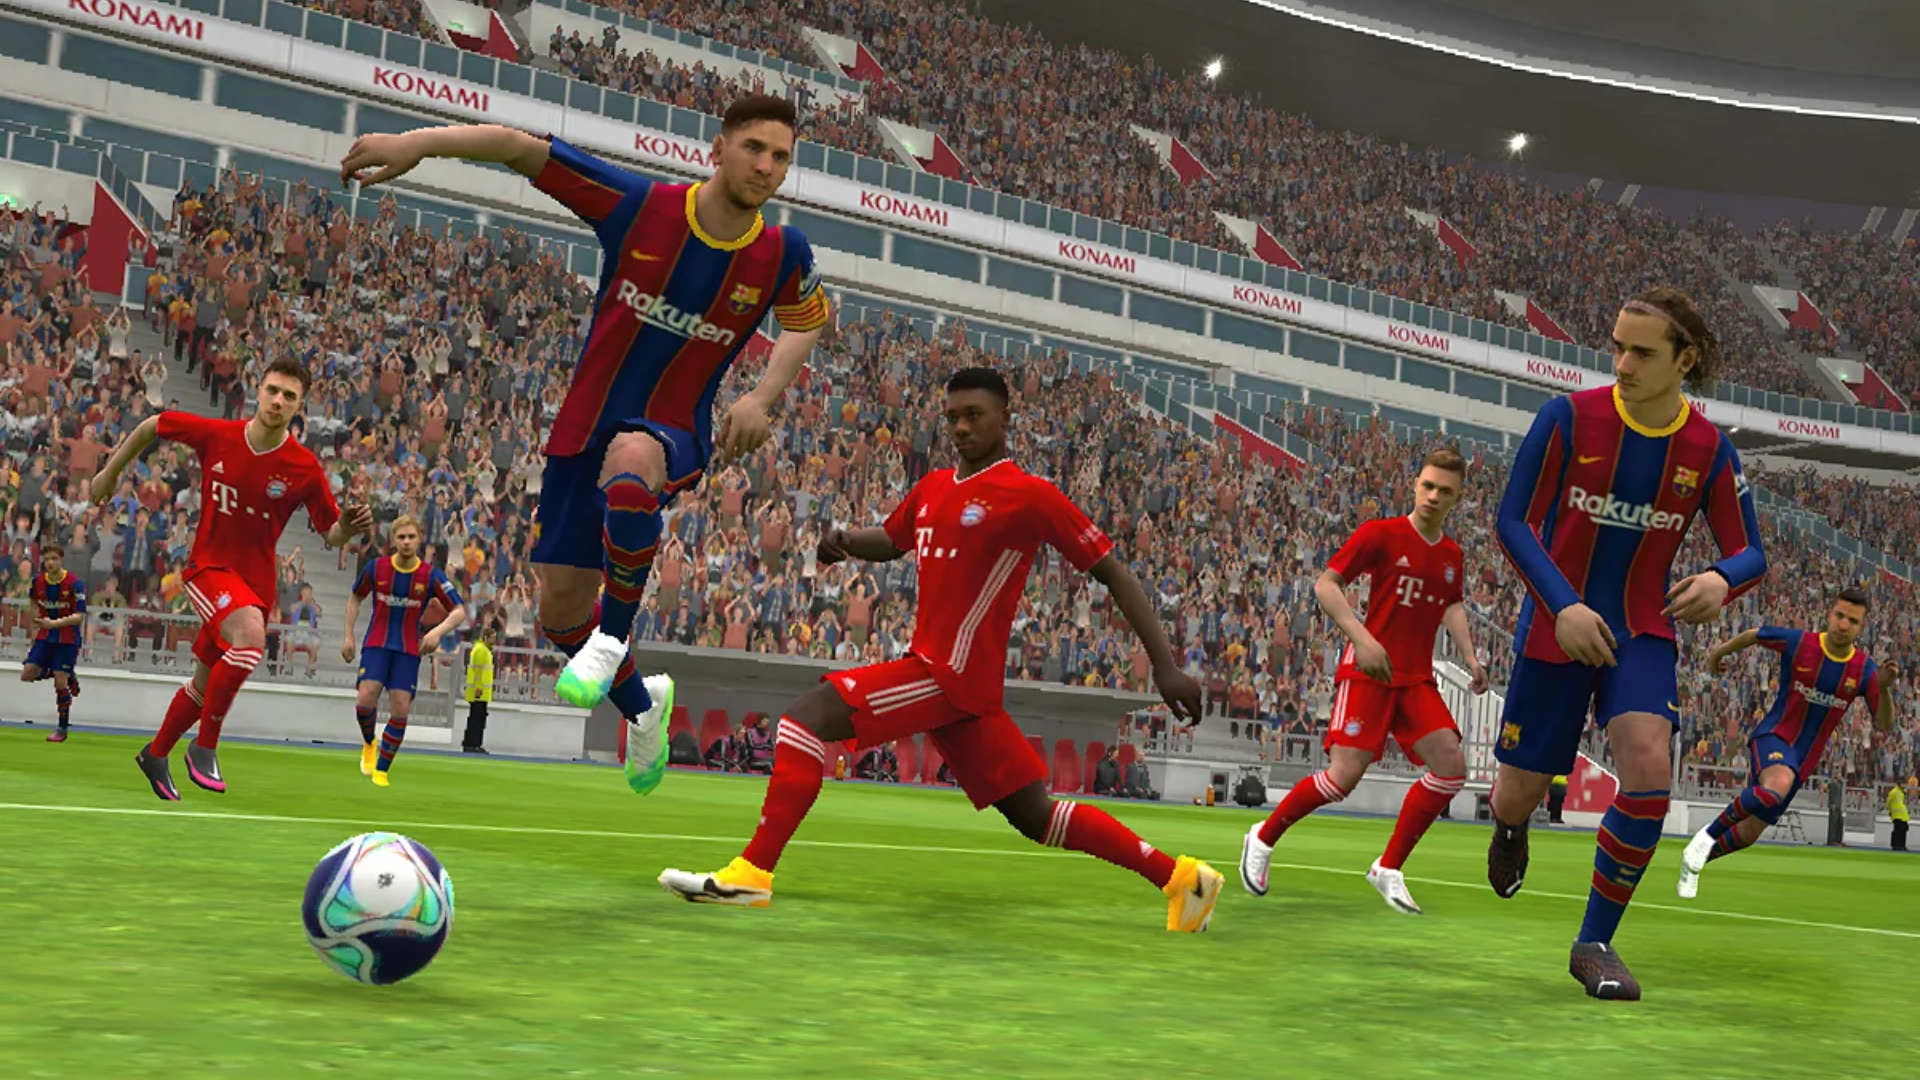 Best mobile sports games: eFootball PES 2021. Image shows Lionel Messi jumping in the air on the football pitch, with various players running around.